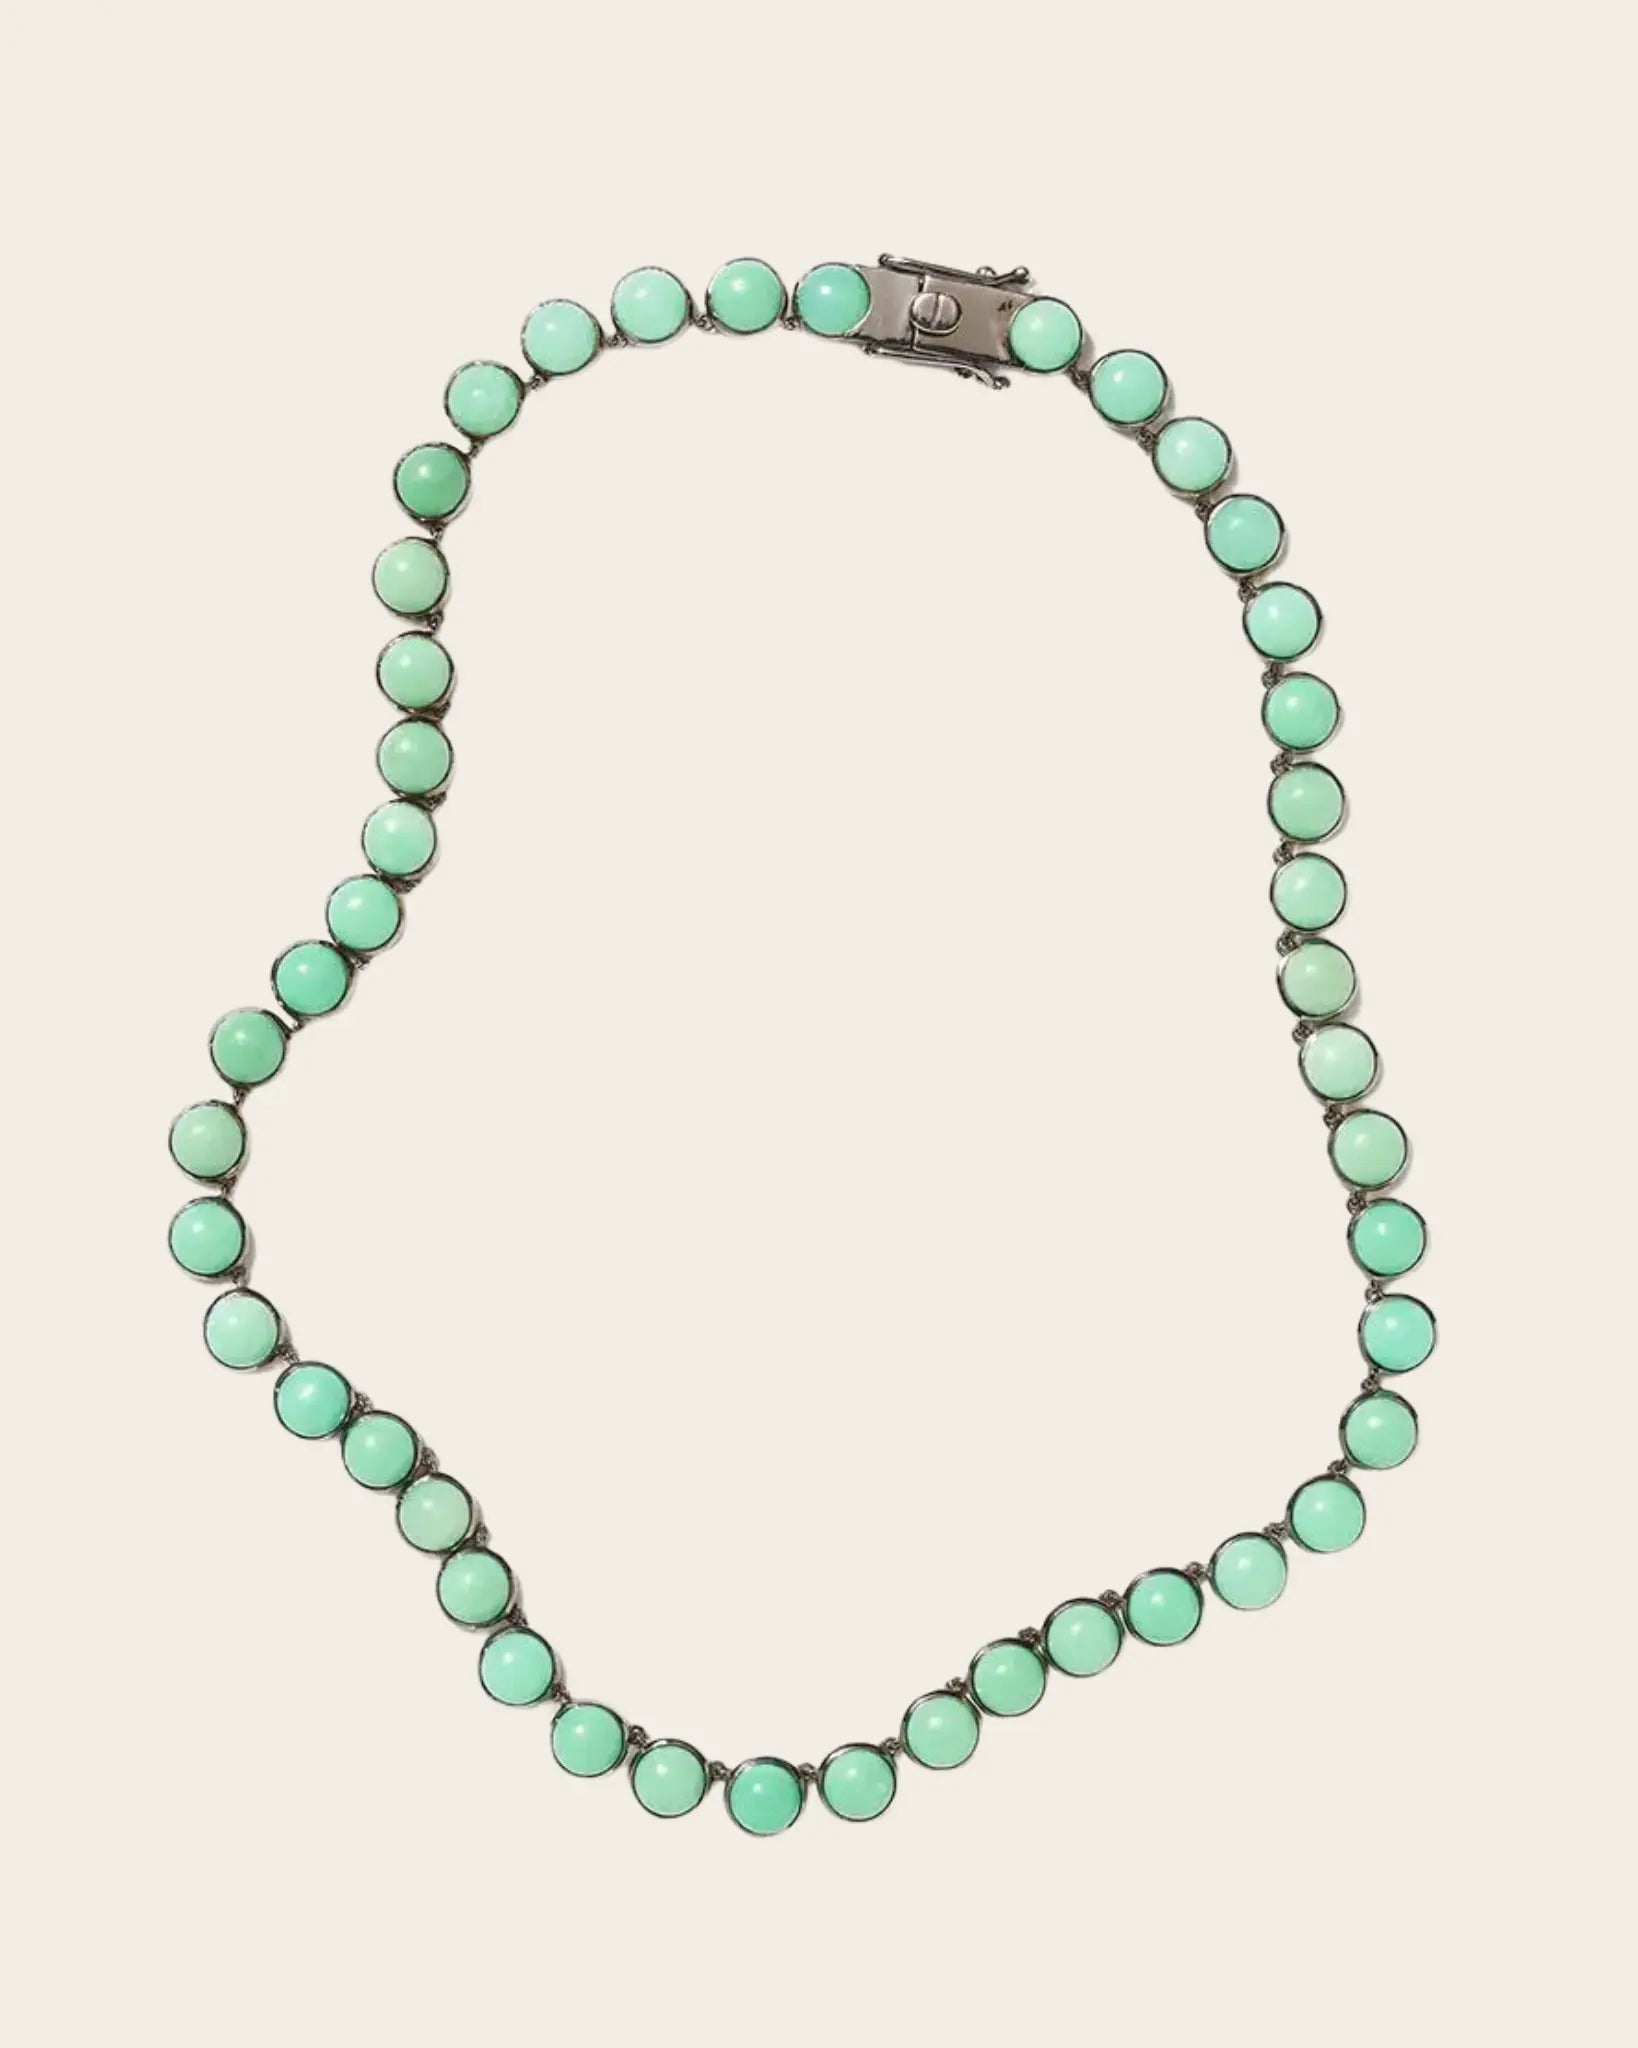 Riviere Dot chrysoprase Necklace Riviere Dot chrysoprase Necklace Nak Armstrong-NAKARD Nak Armstrong-NAKARD  Squash Blossom Vail